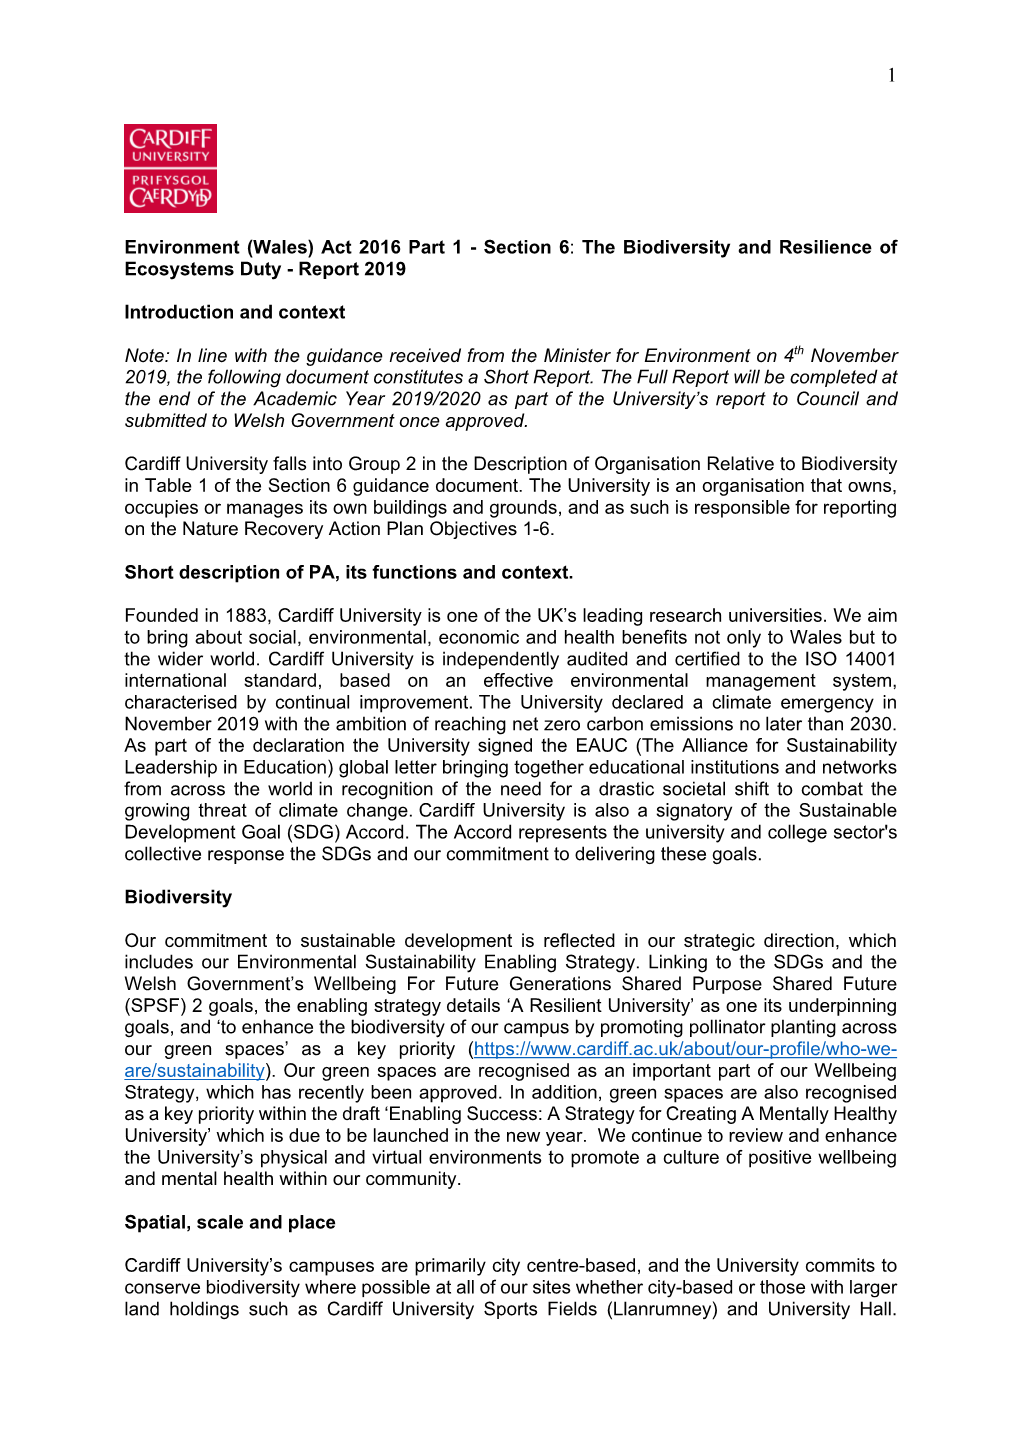 Environment (Wales) Act 2016 Part 1 - Section 6: the Biodiversity and Resilience of Ecosystems Duty - Report 2019